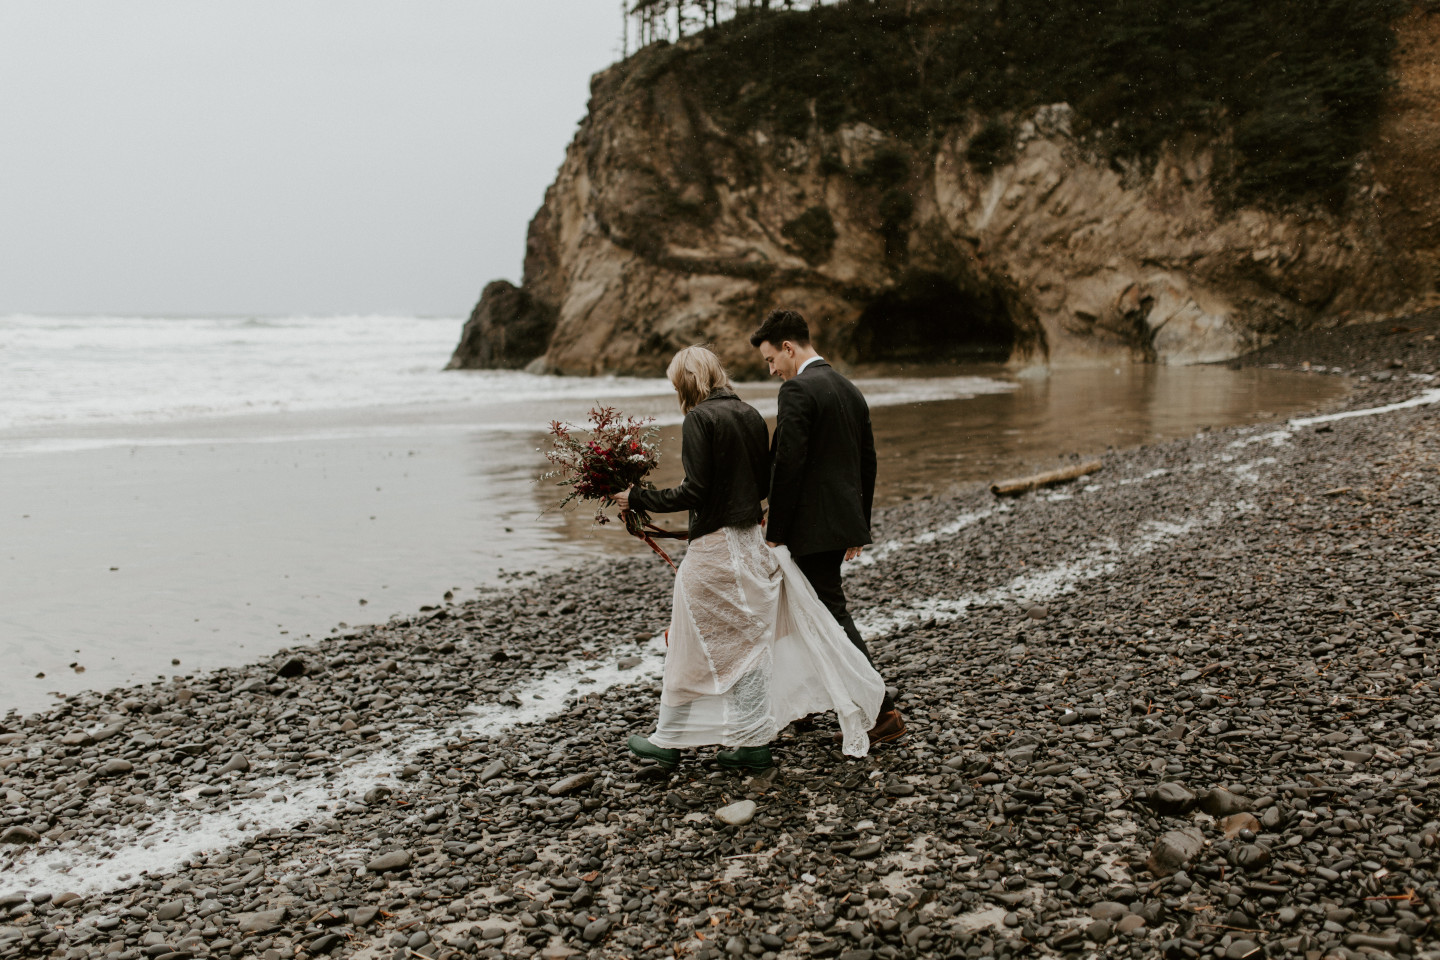 Hannah and Grant walk along the rocky shore of Cannon Beach during their rainy elopement in Oregon. Wedding photography in Portland Oregon by Sienna Plus Josh.